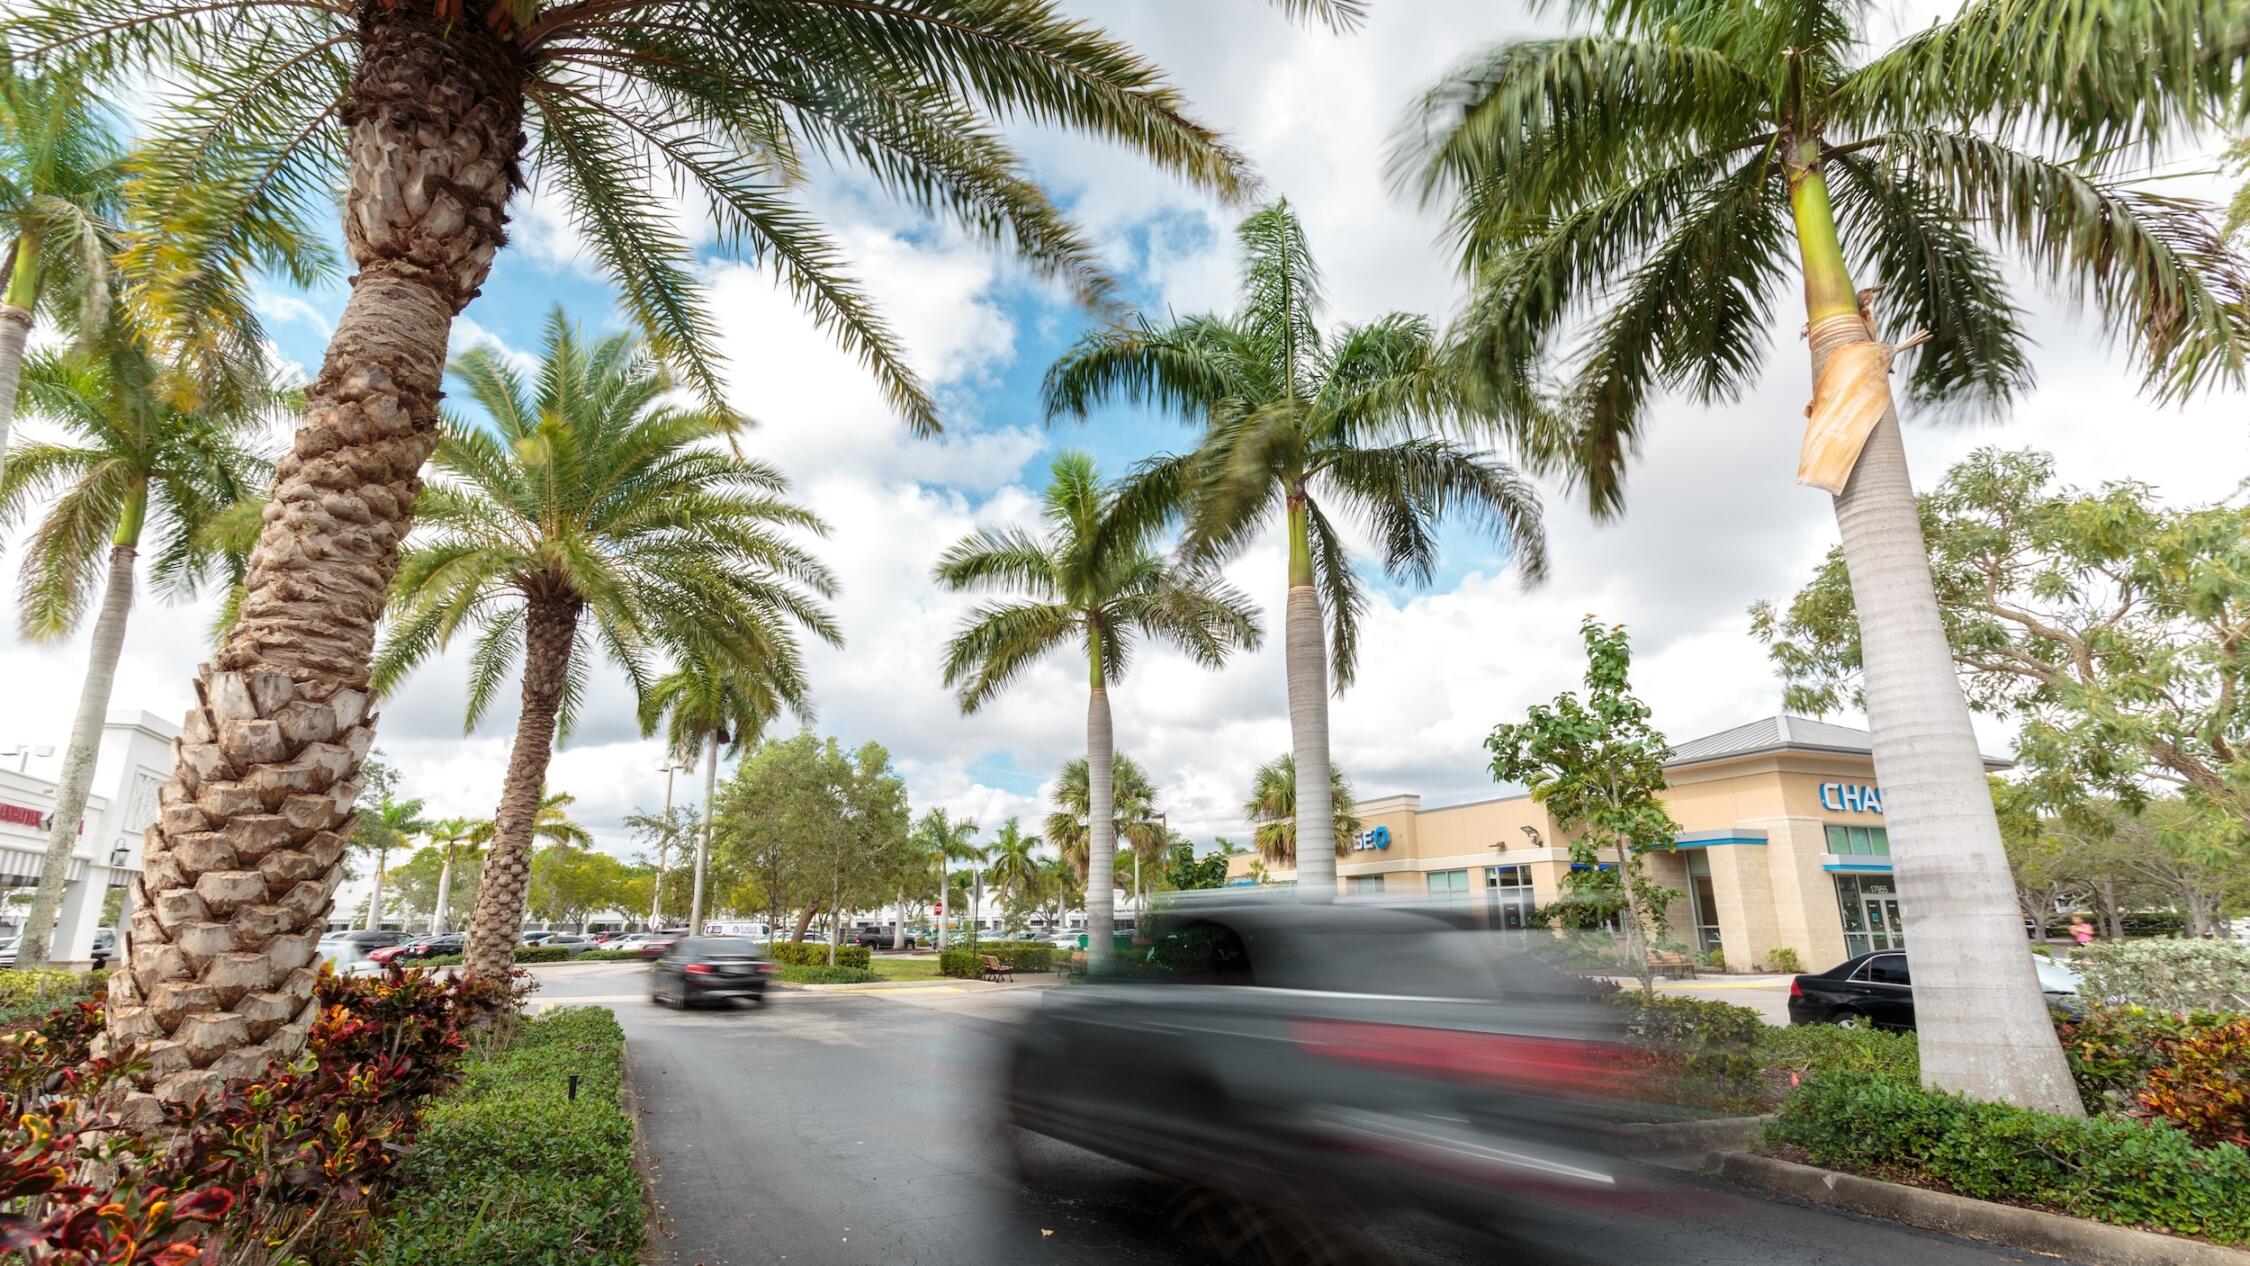 Cars enter Polo Club Shops with palm trees on both sides.